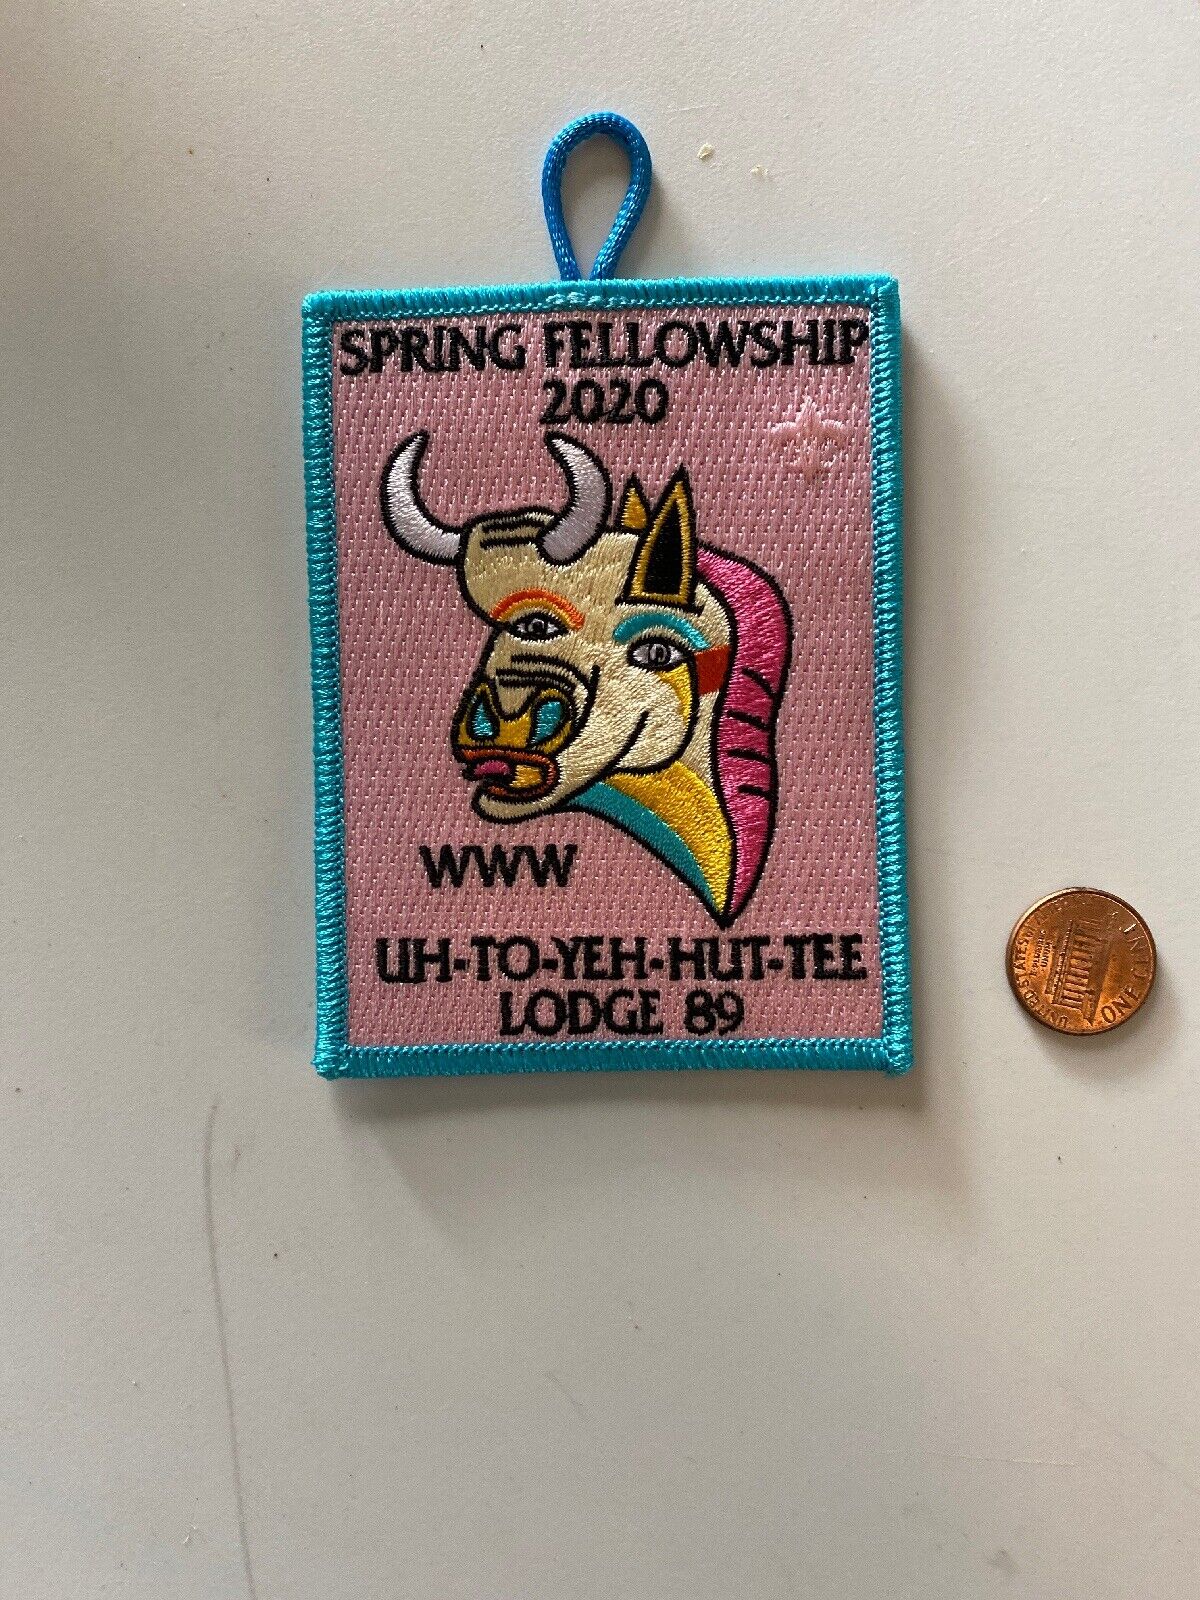 Uh-to-yeh-hut-tee Lodge 2020 Spring Fellowship Patch Order of the Arrow ABC-261G